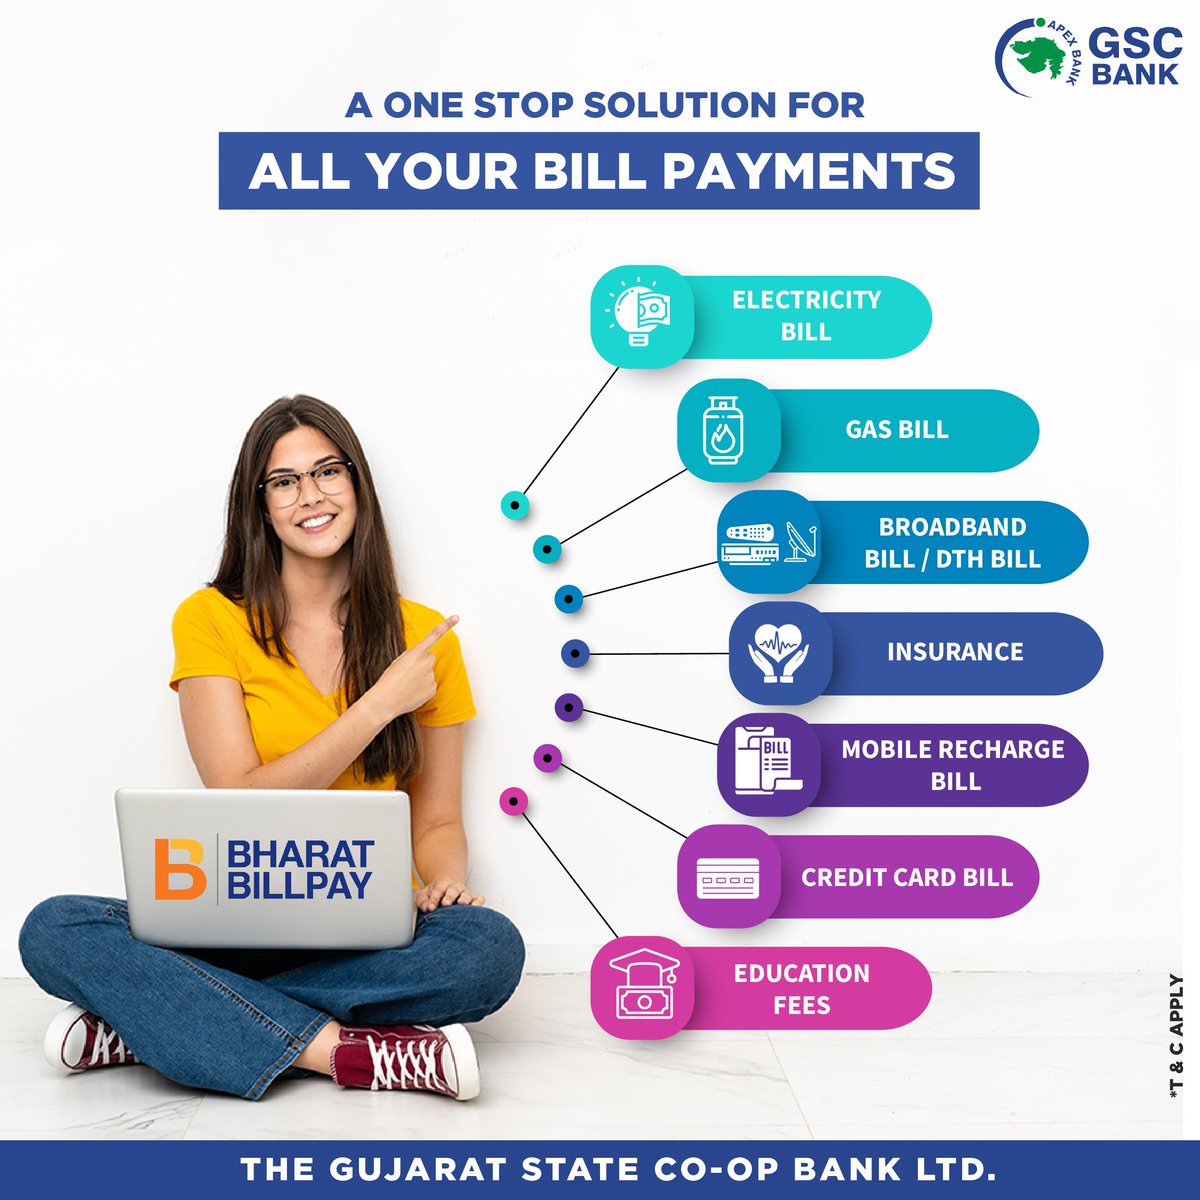 A ONE STOP SOLUTION FOR ALL YOUR BILL PAYMENTS.
#bank #GSCB #BBPS #ZeroCharges #free #digitalpayment #DigitalBanking #Securebanking #FollowUs #digitalservices